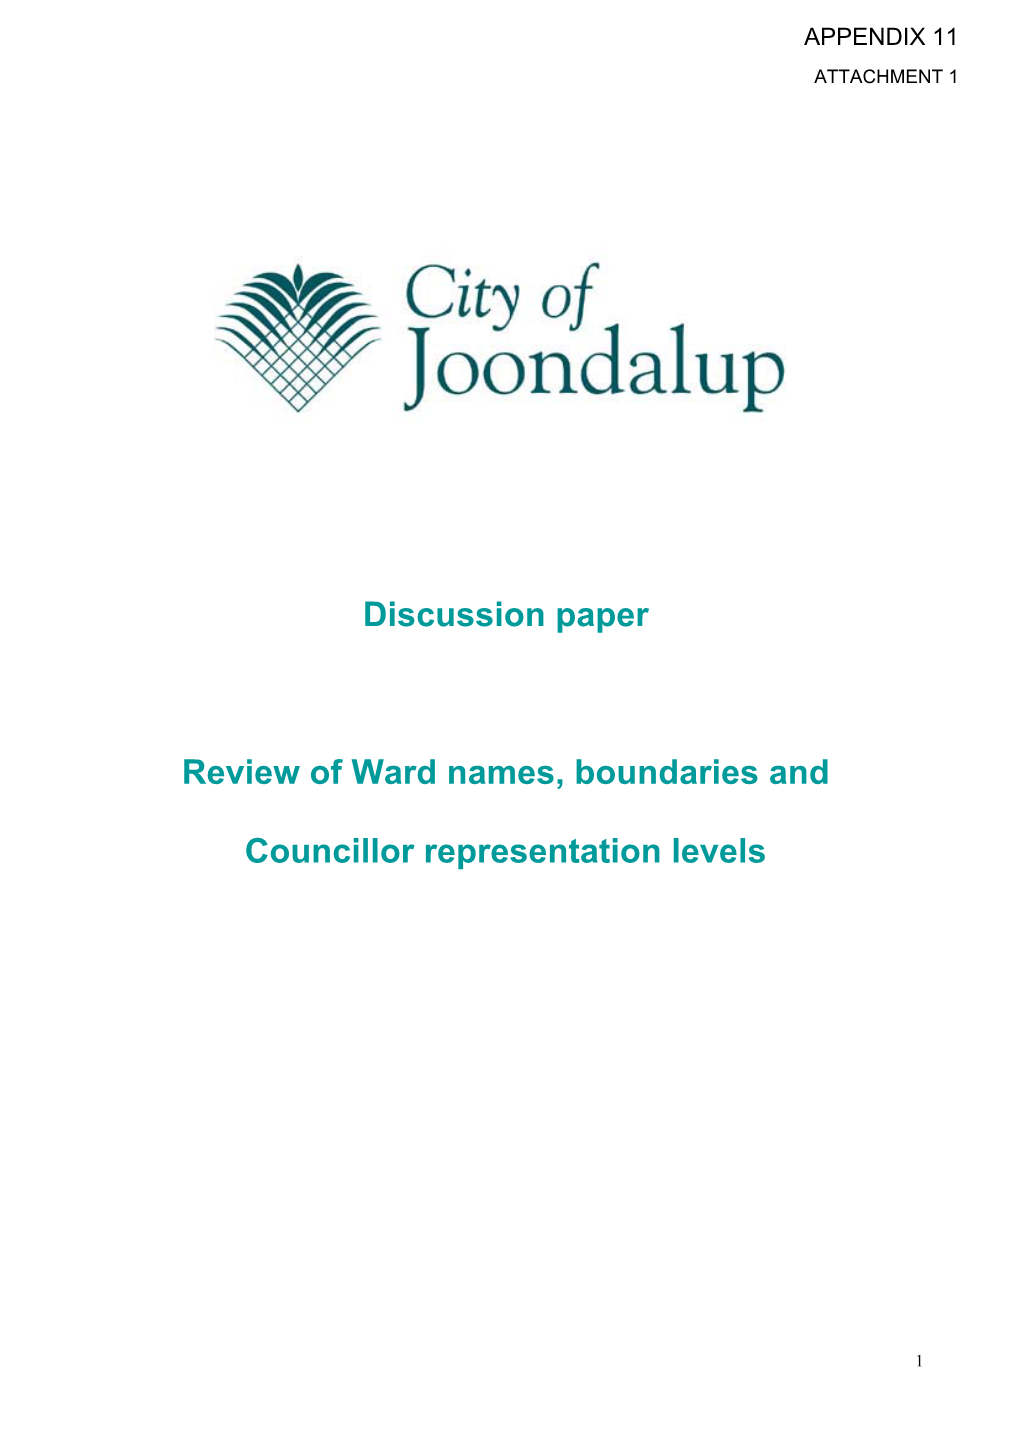 Discussion Paper Review of Ward Names, Boundaries and Councillor